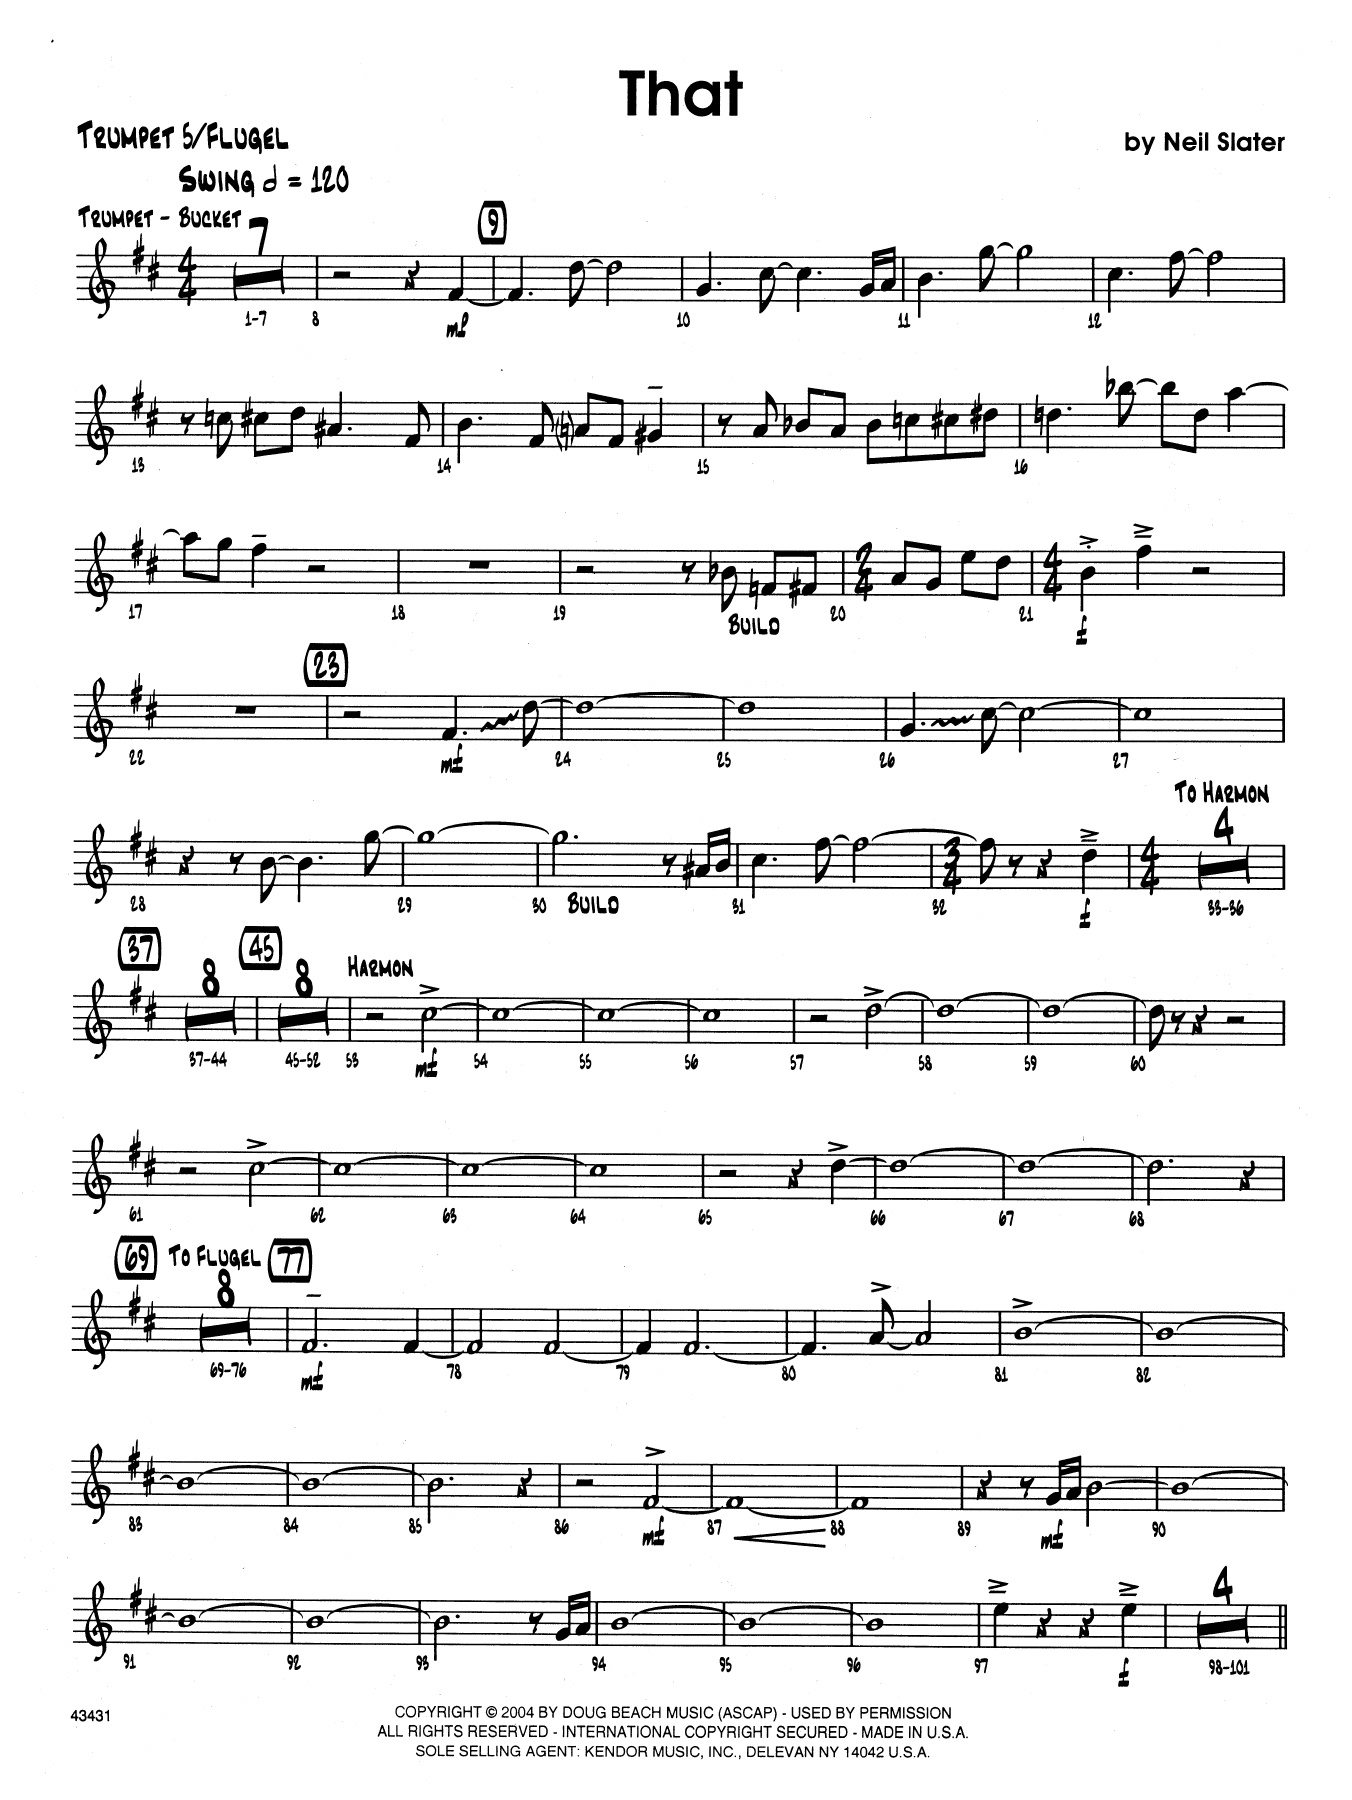 Download Neil Slater That - 5th Bb Trumpet Sheet Music